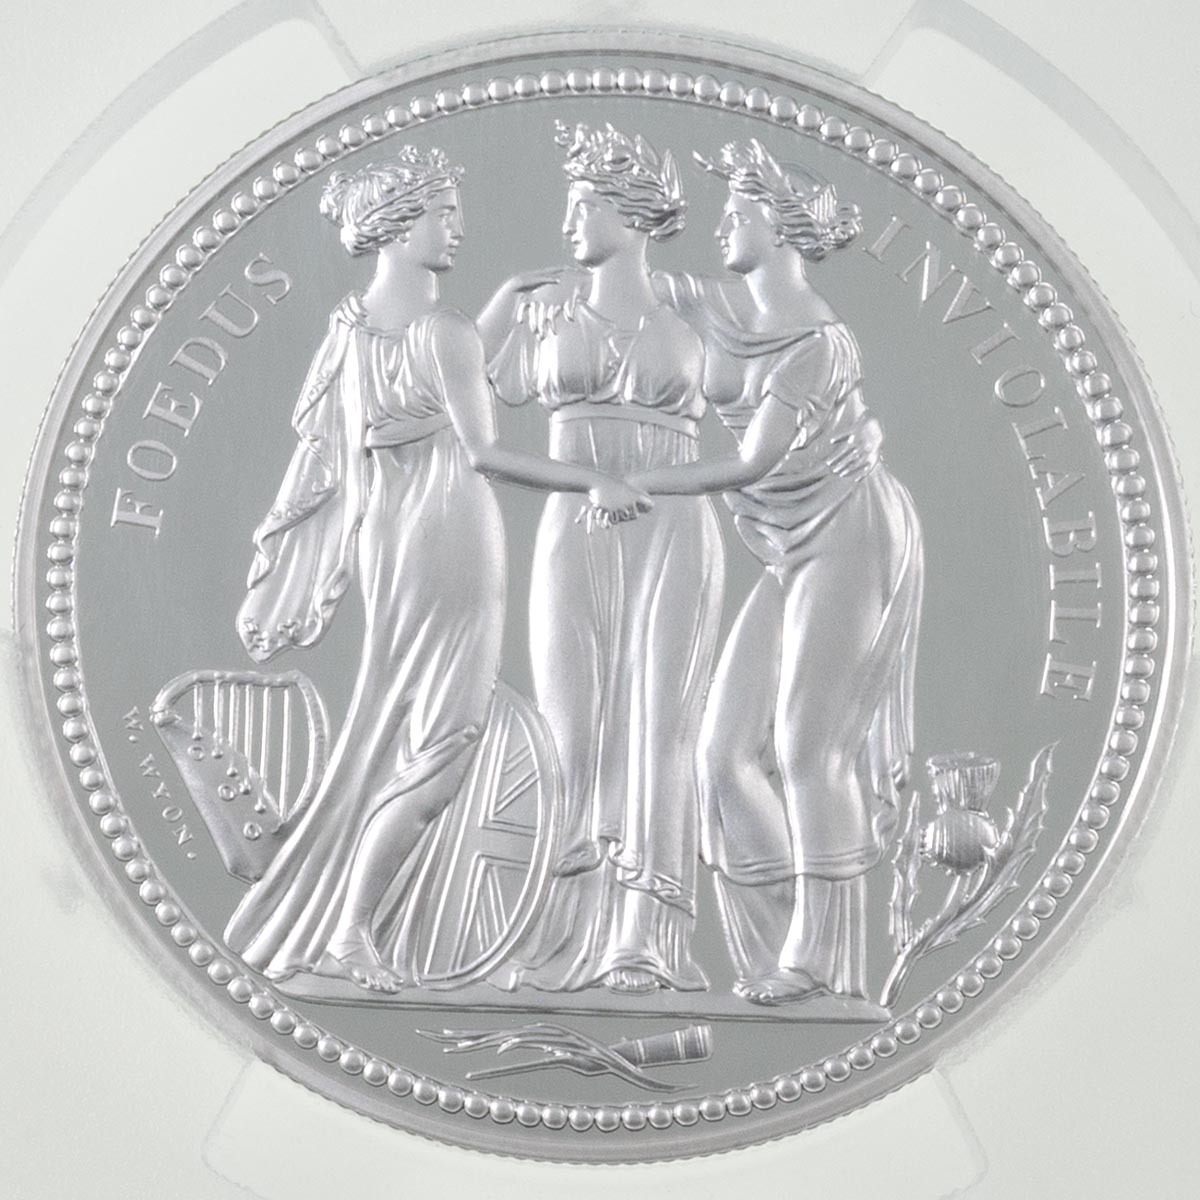 2020 Alderney Three Graces Two Ounce Silver Proof Coin PCGS Graded PR70DCAM Reverse